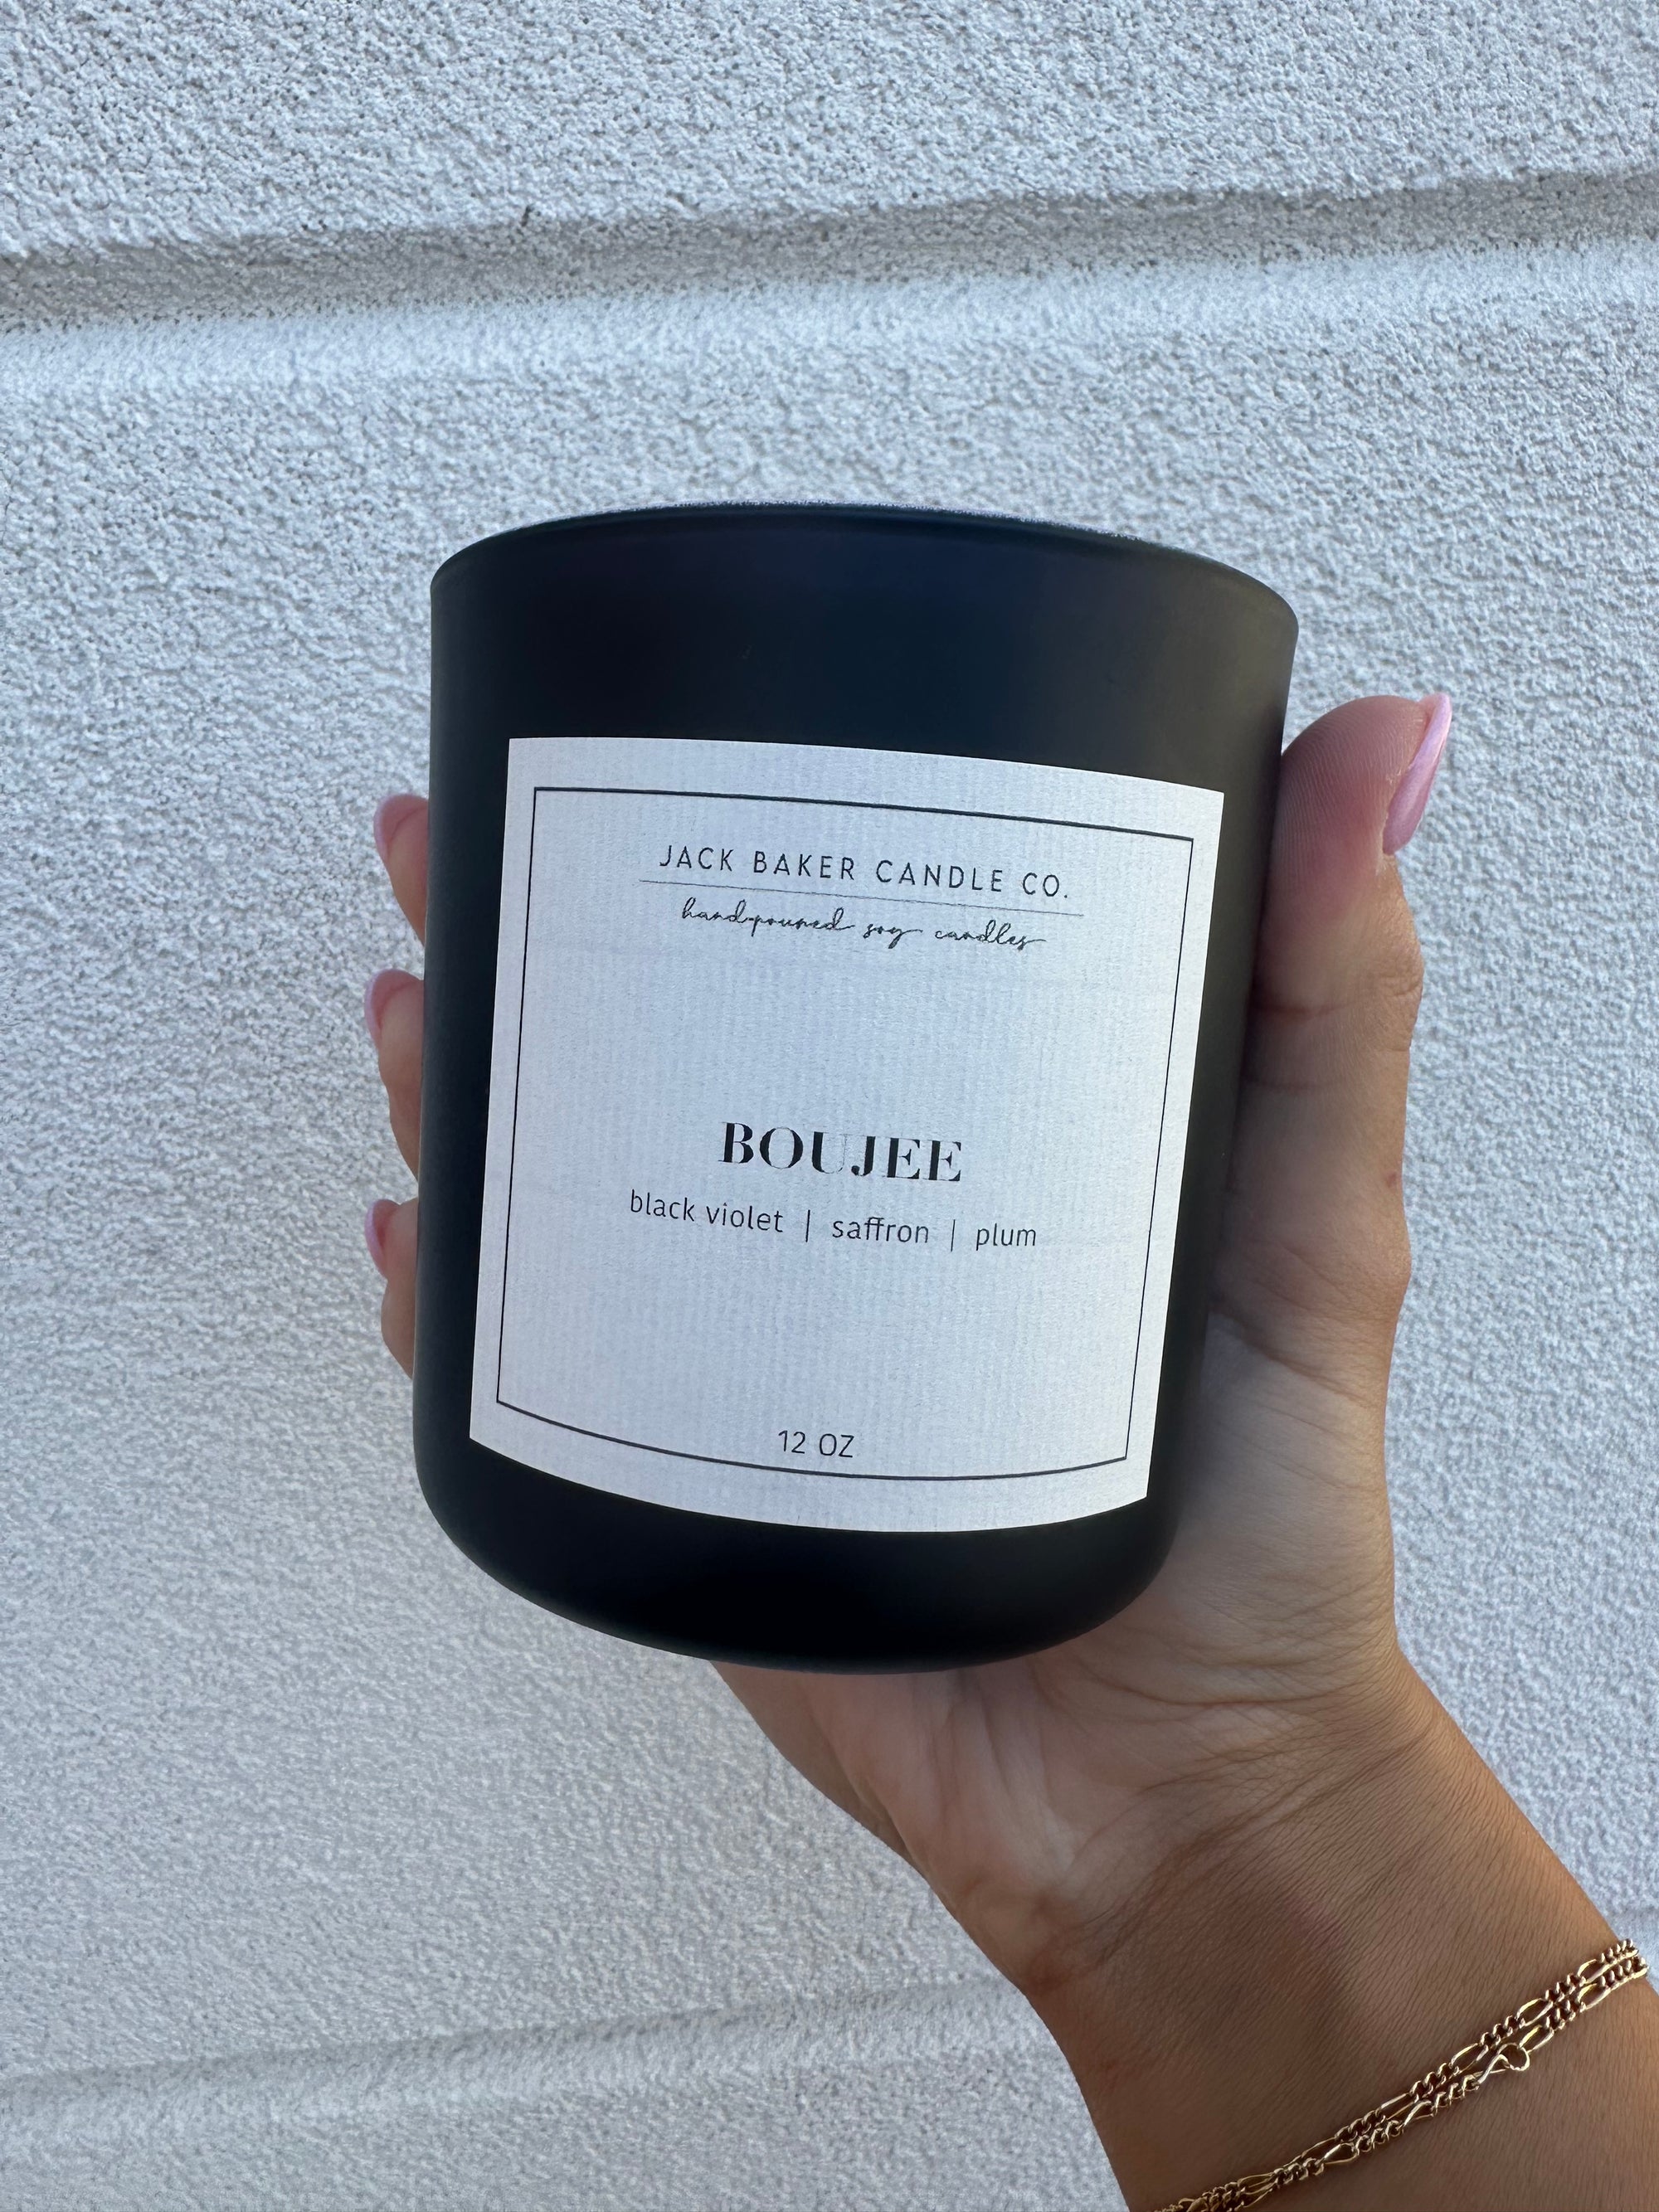 Boujee Candle